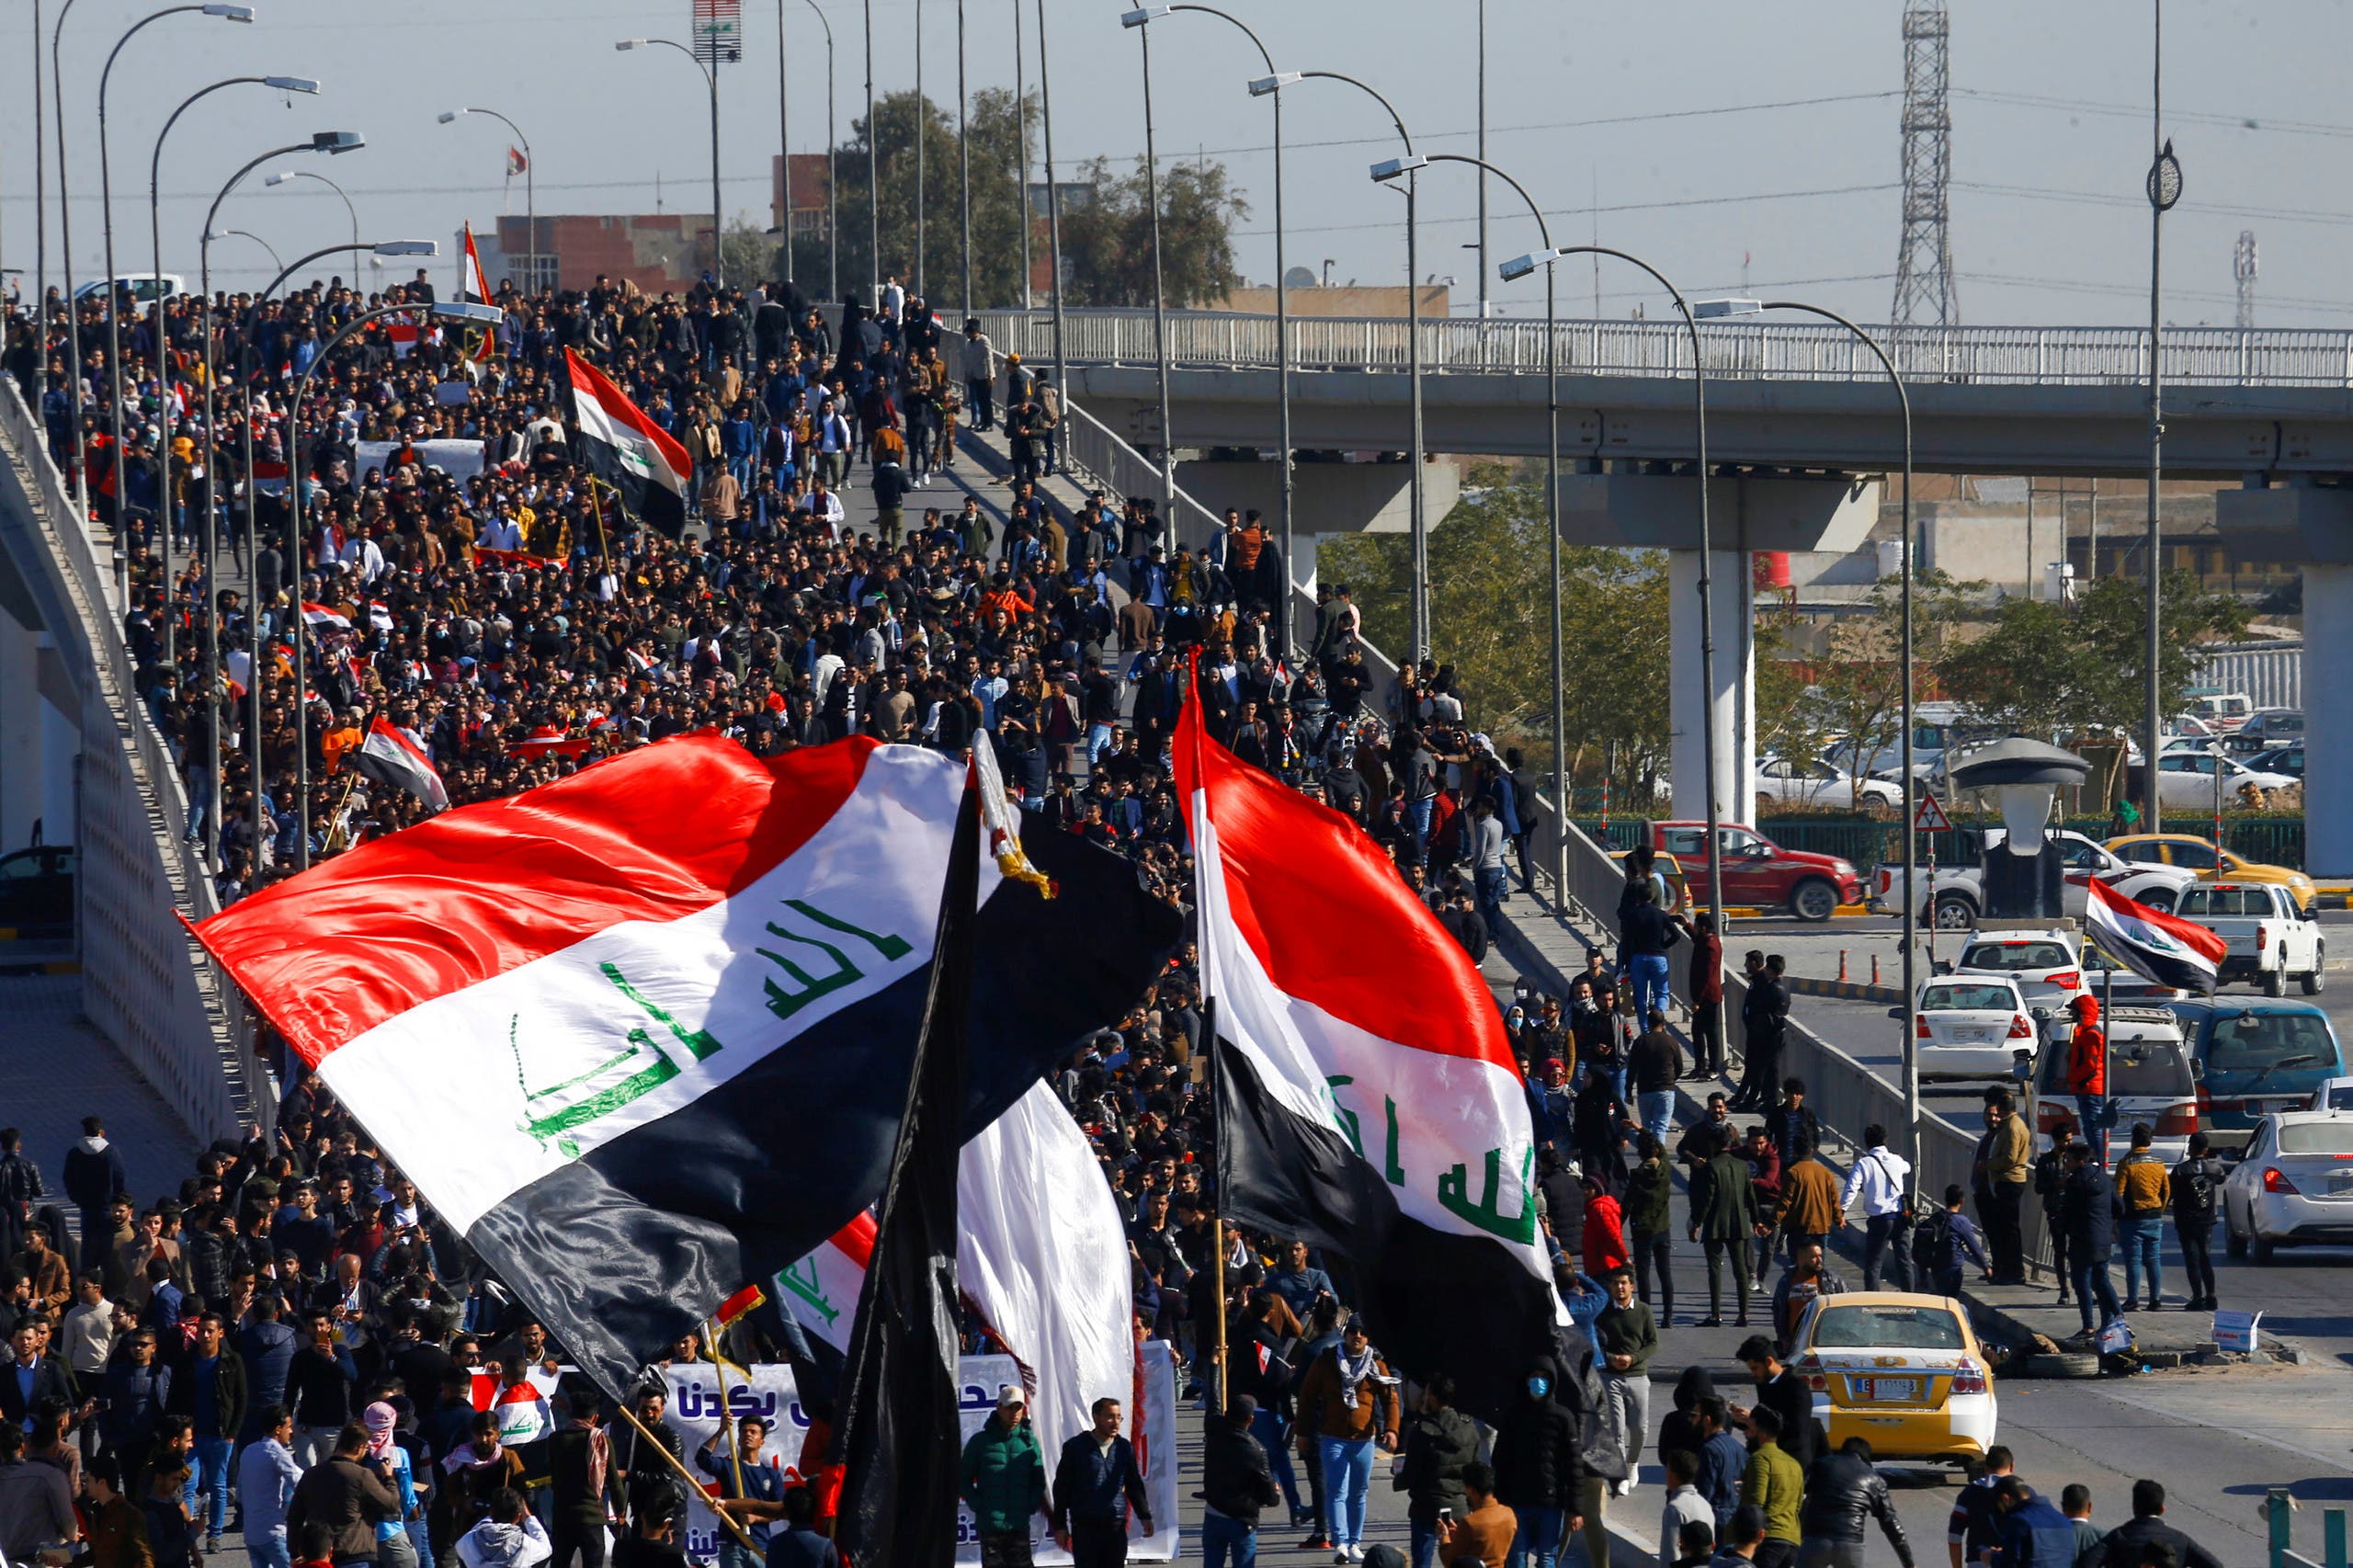 University students hold Iraqi flags during ongoing anti-government protests in Najaf, Iraq January 12, 2020. (Reuters)